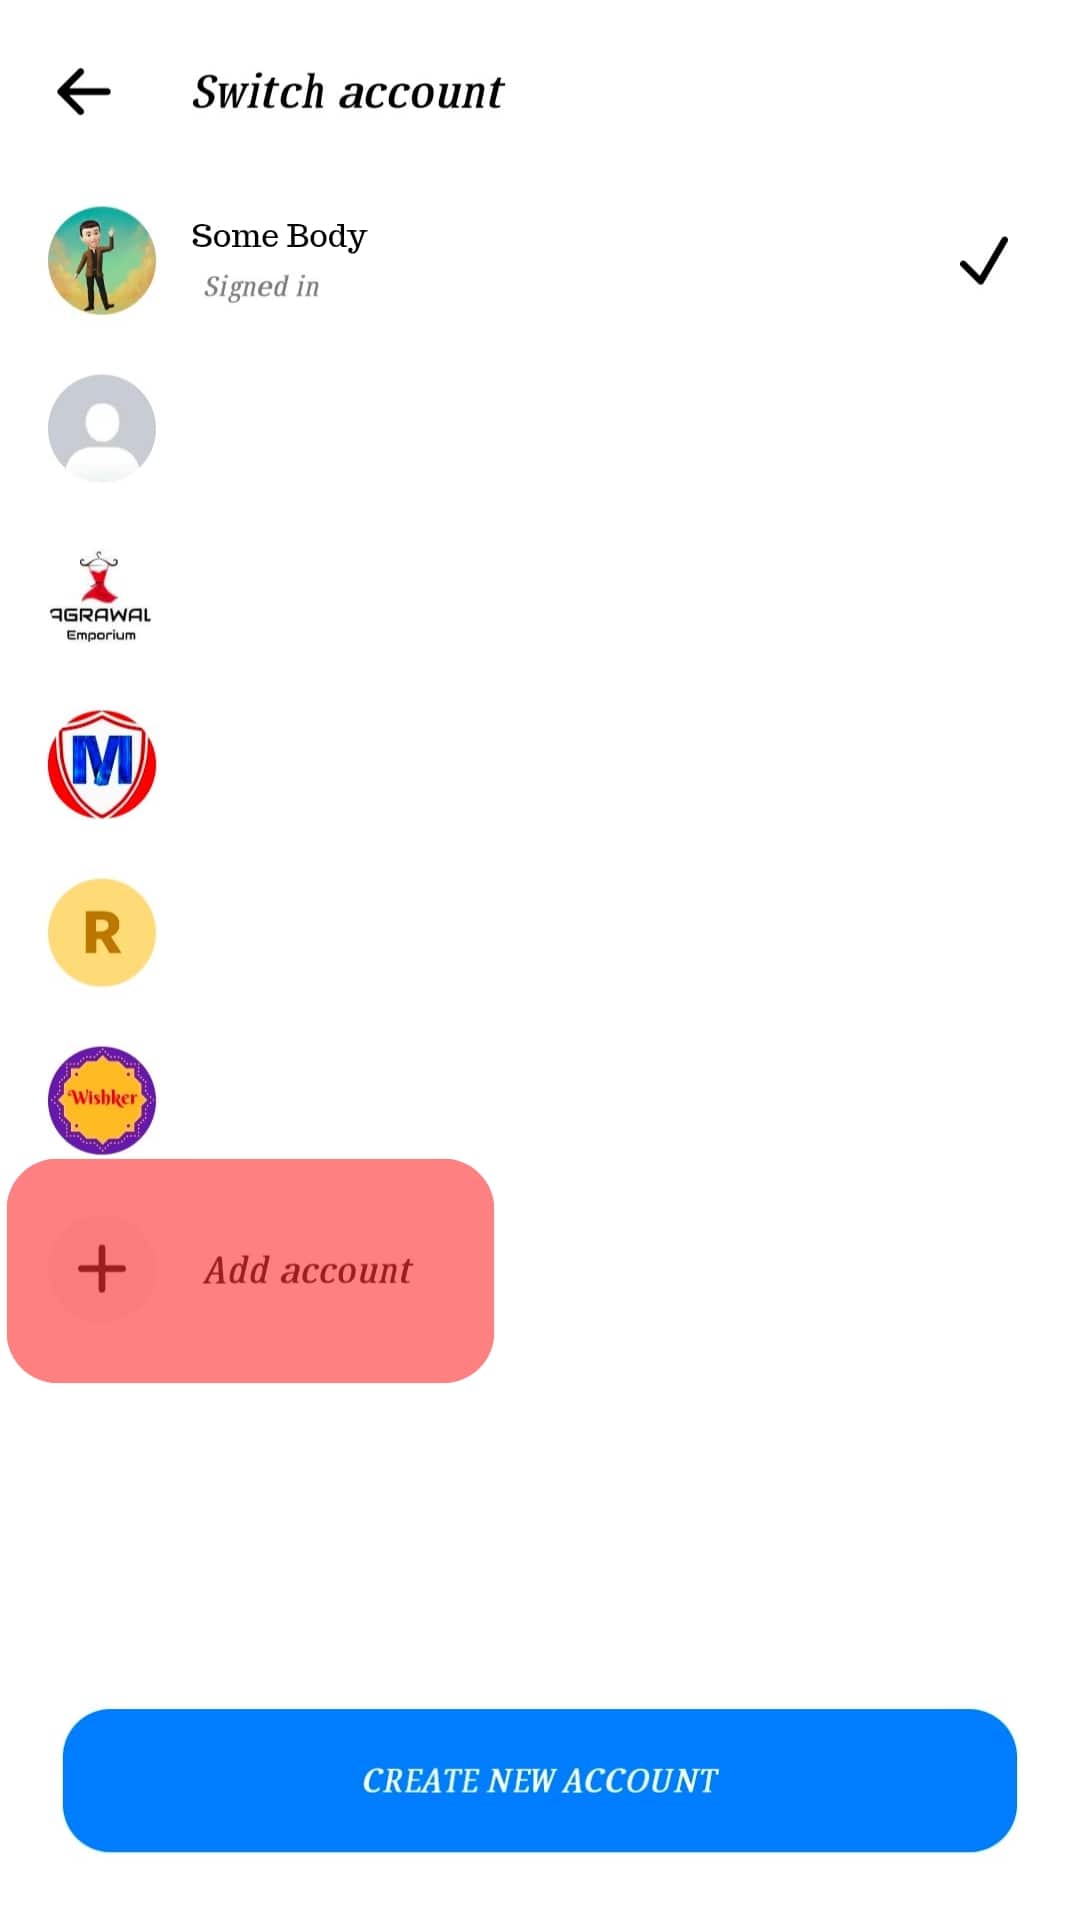 Select The Option For Add Account.